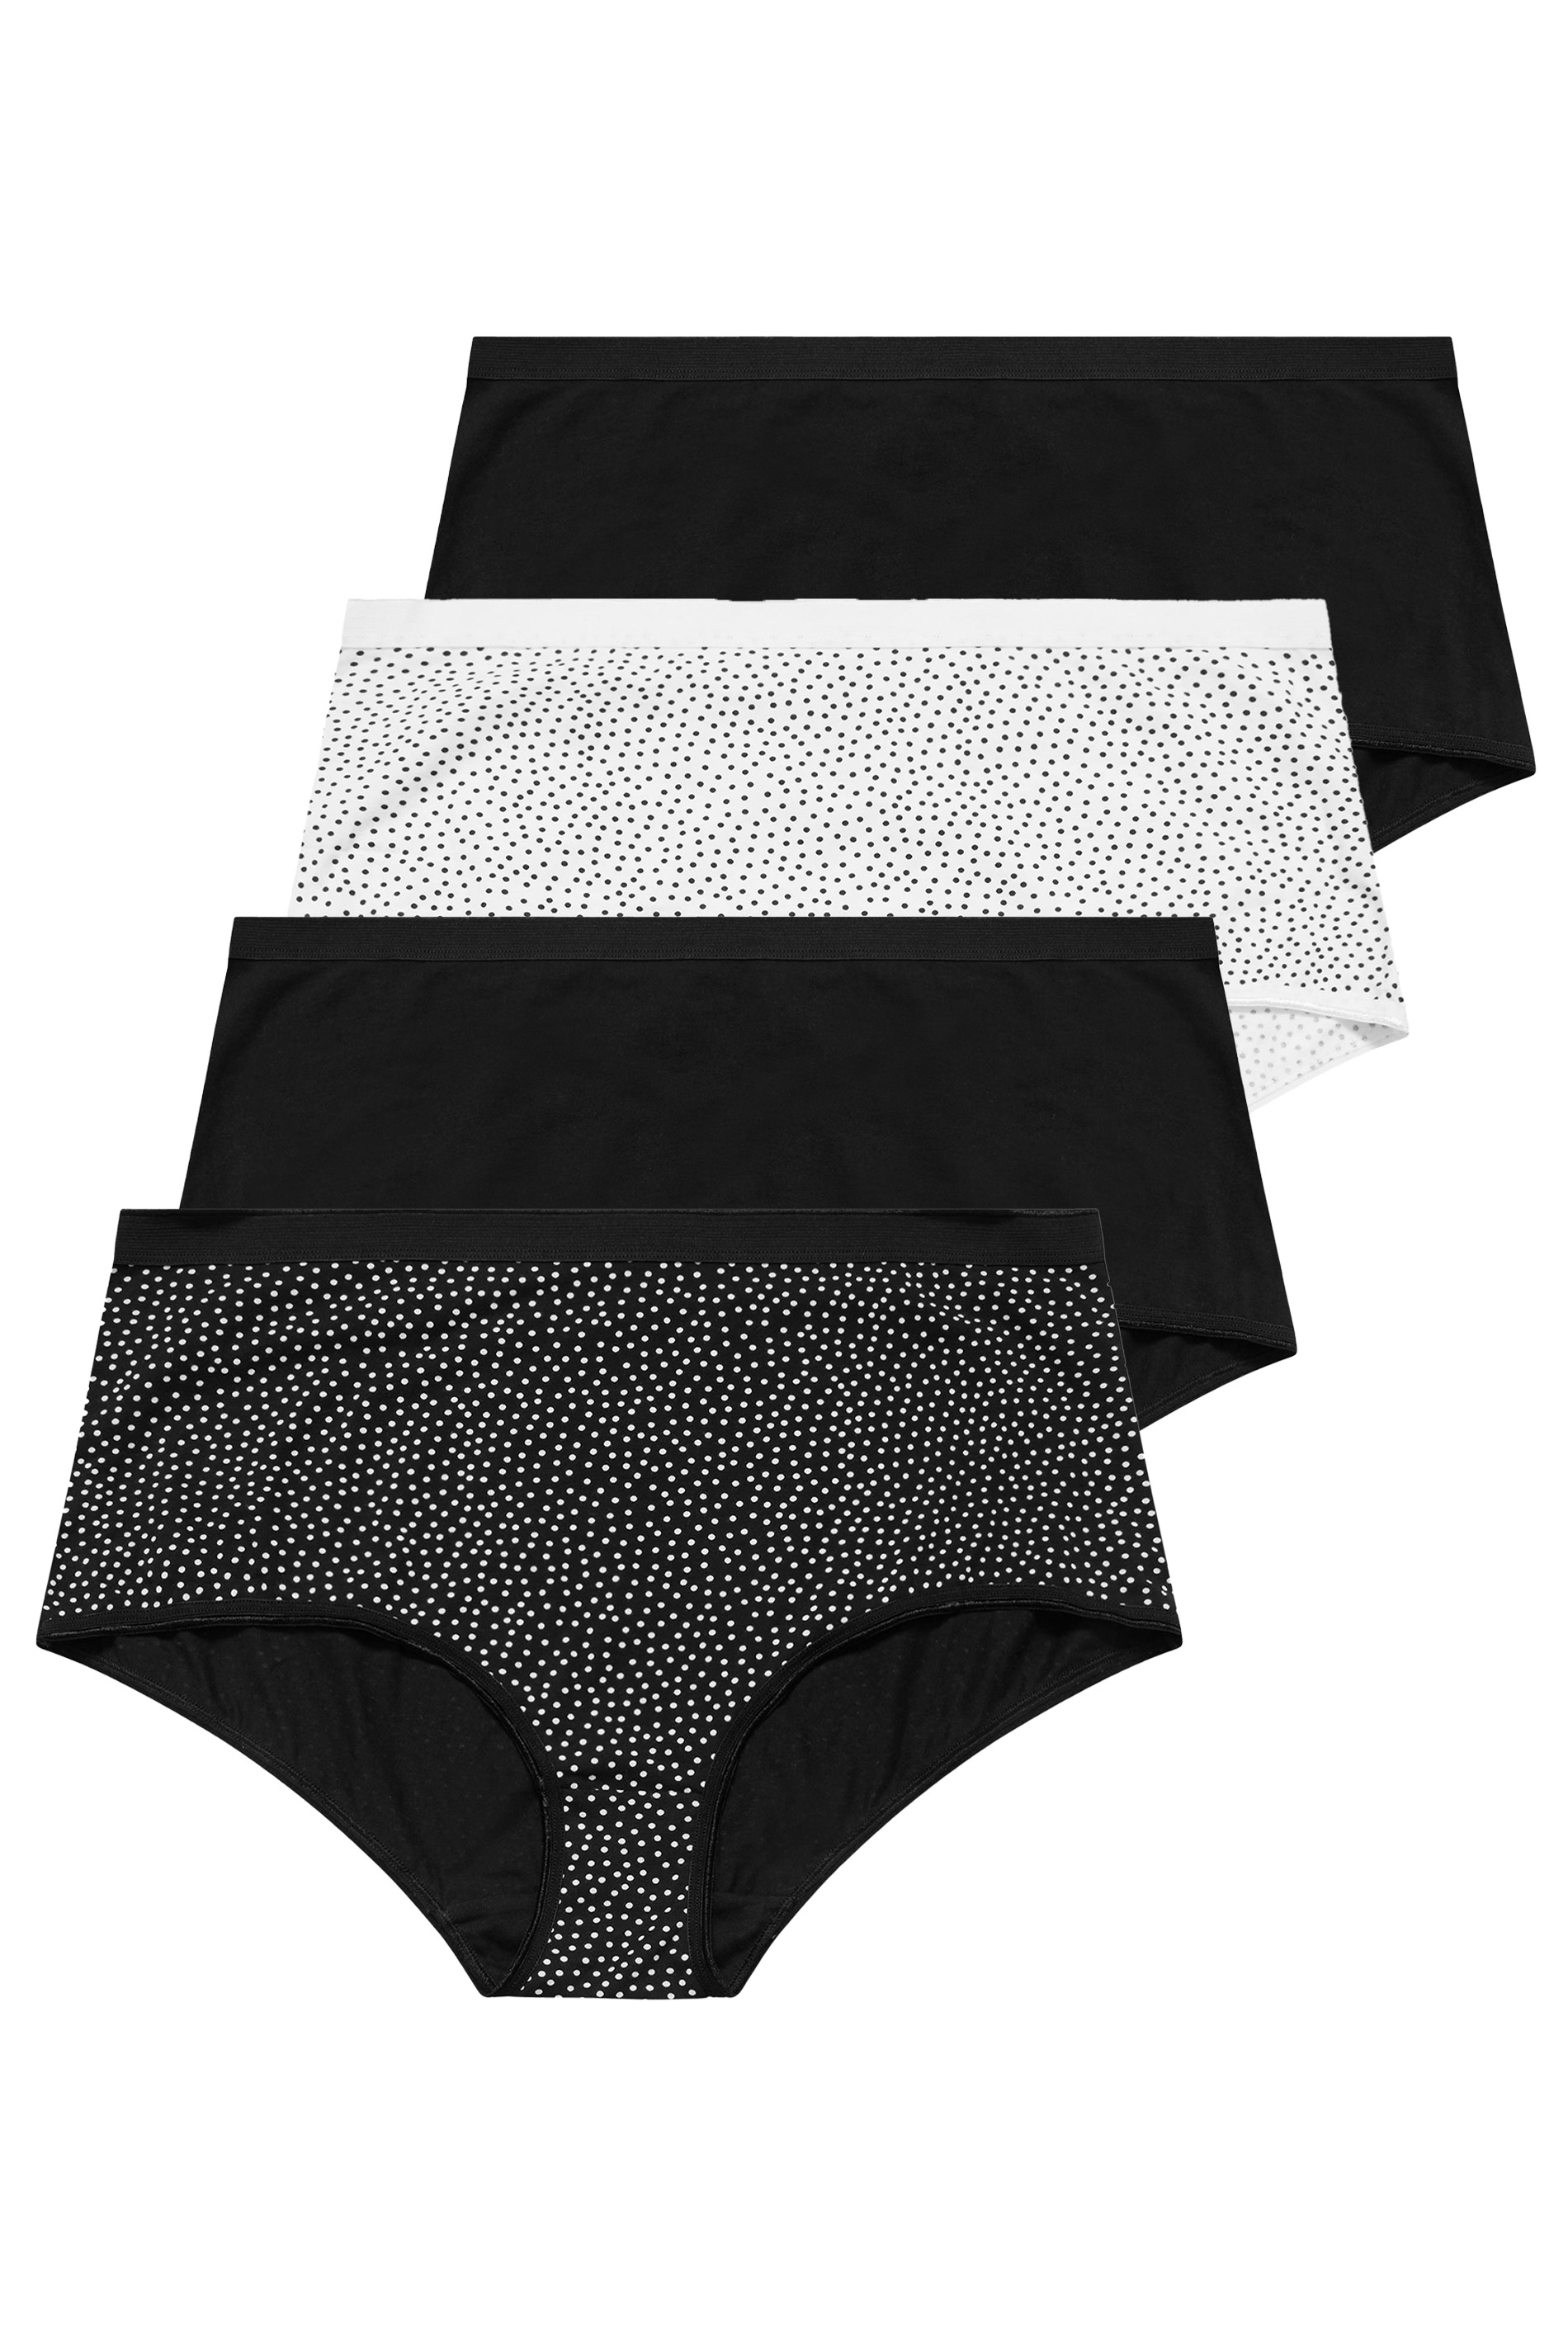 YOURS 4 PACK Plus Size Black Spot Print Cotton Stretch Full Briefs | Yours Clothing 3